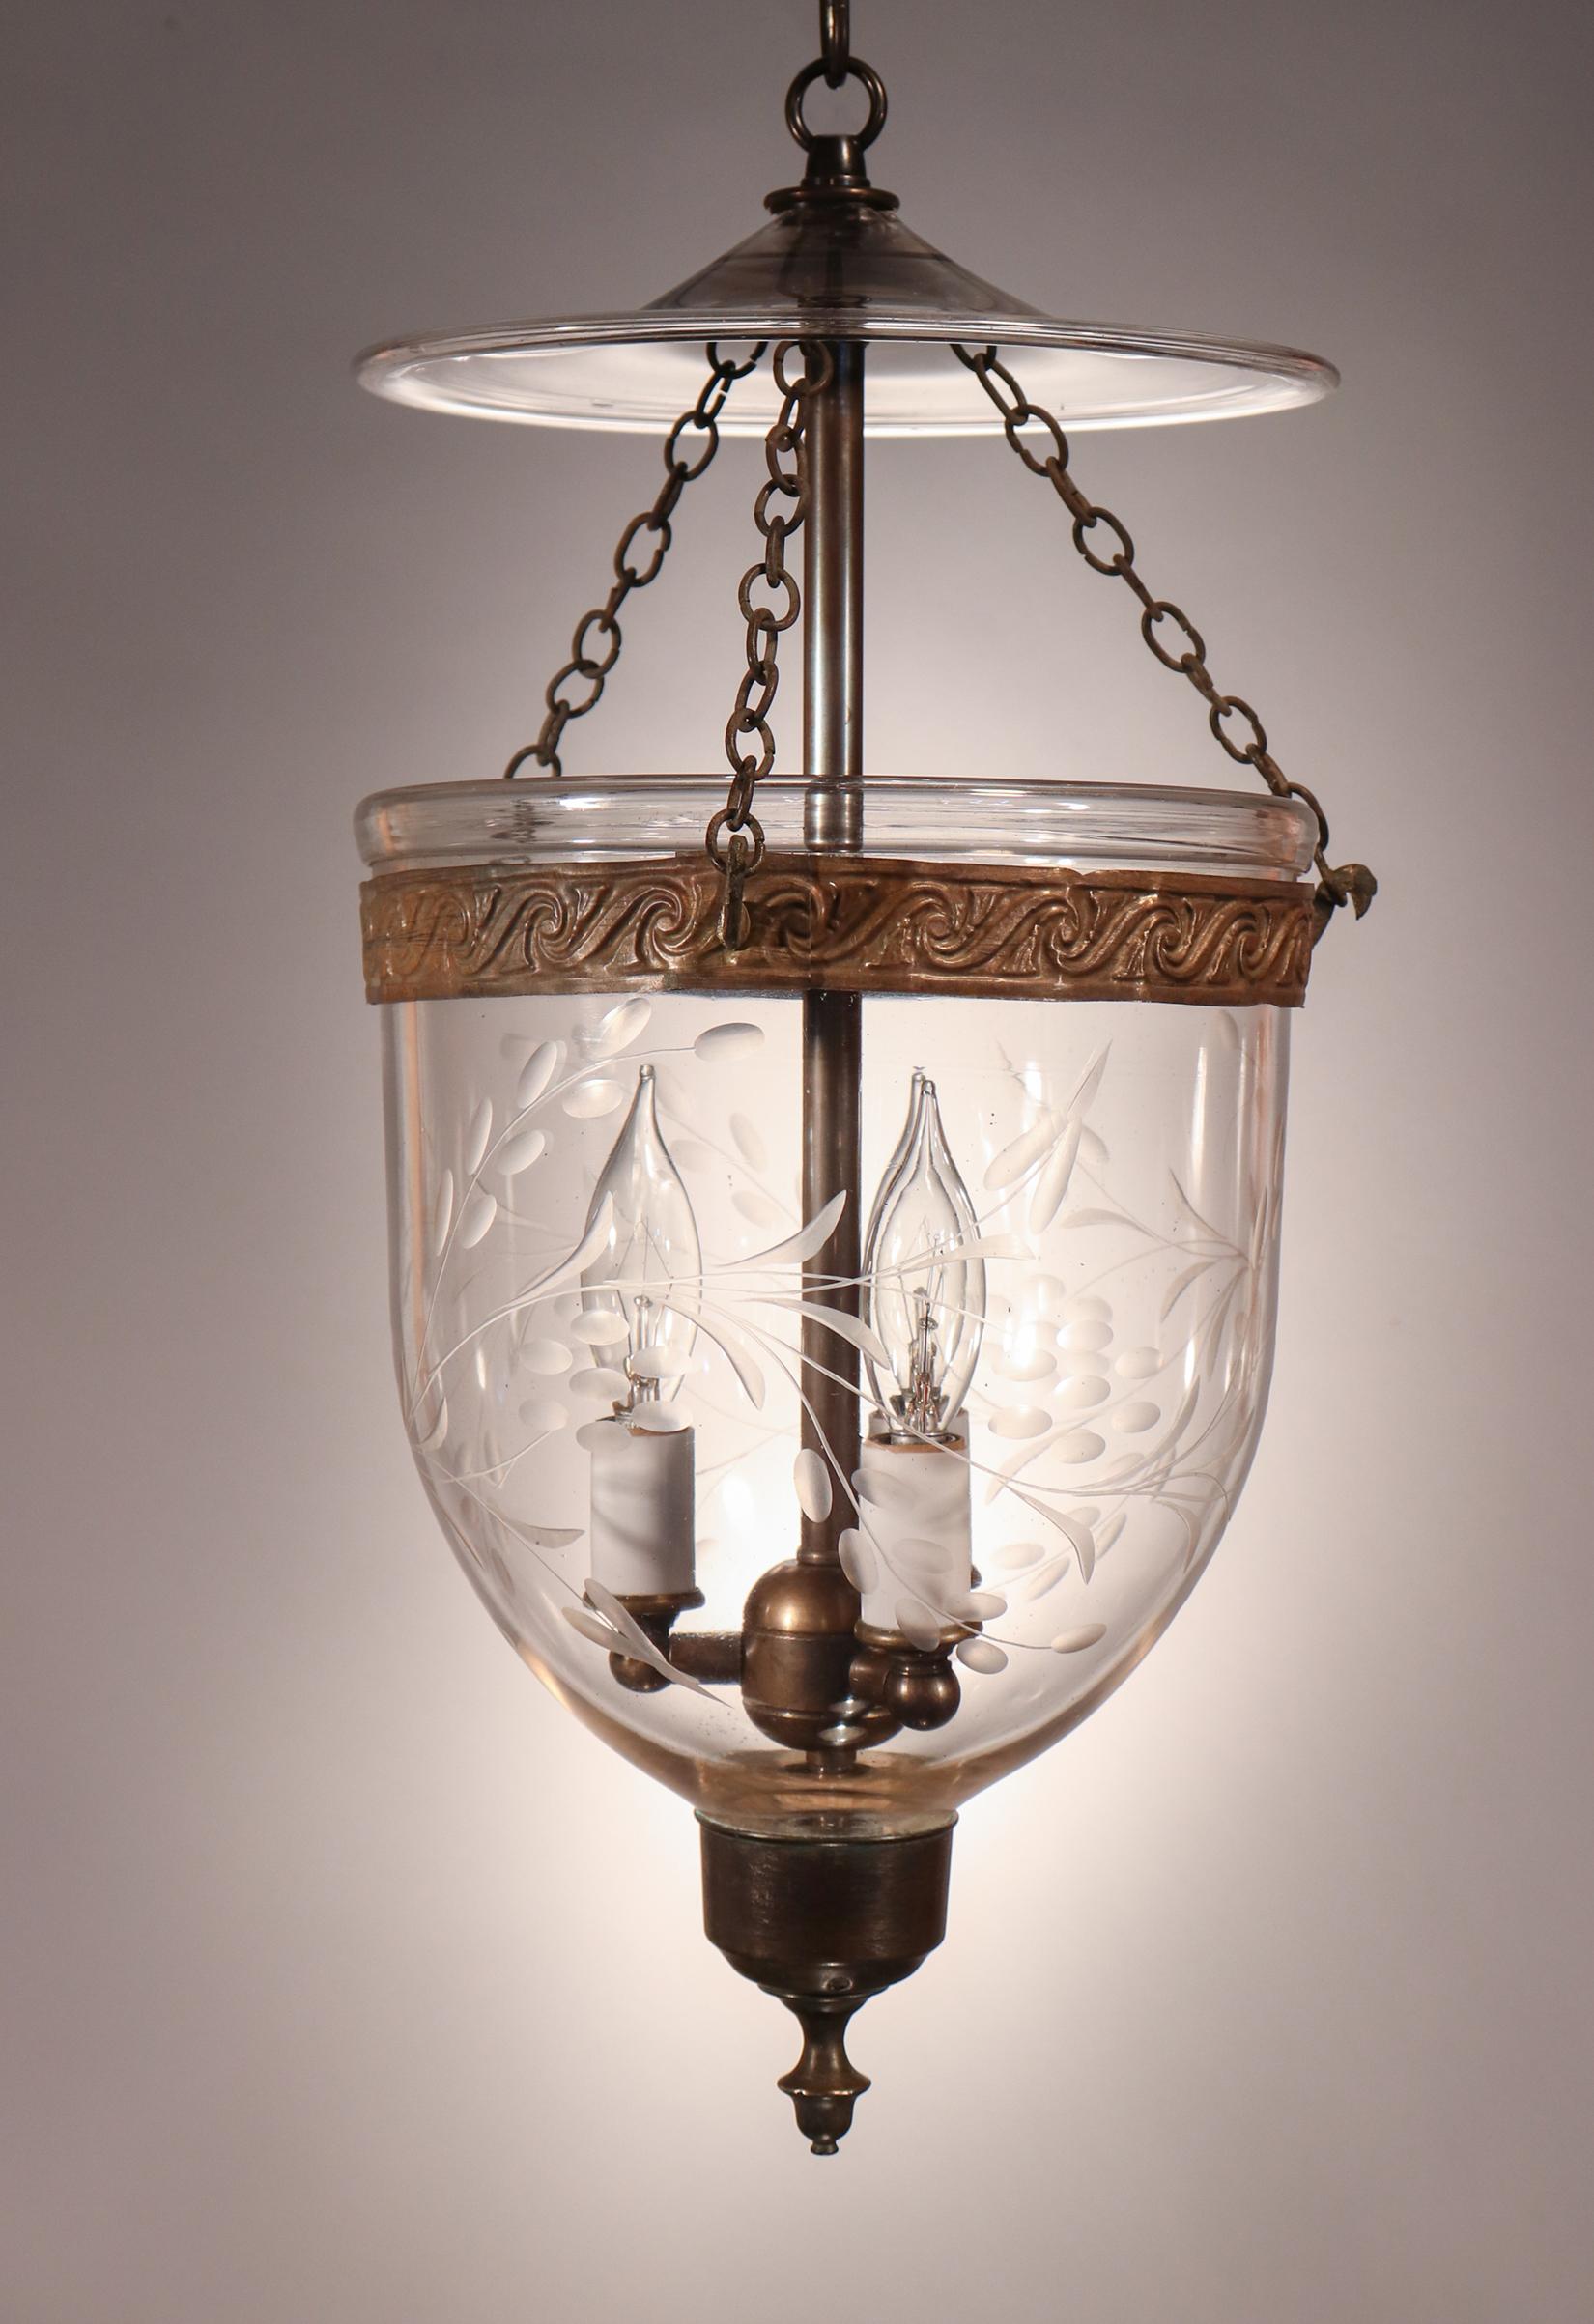 A beautiful antique English bell jar lantern with excellent quality hand blown glass and an etched vine motif. This diminutive pendant features all-original fittings—including its embossed brass band and brass finial/candleholder base. At 8-inches